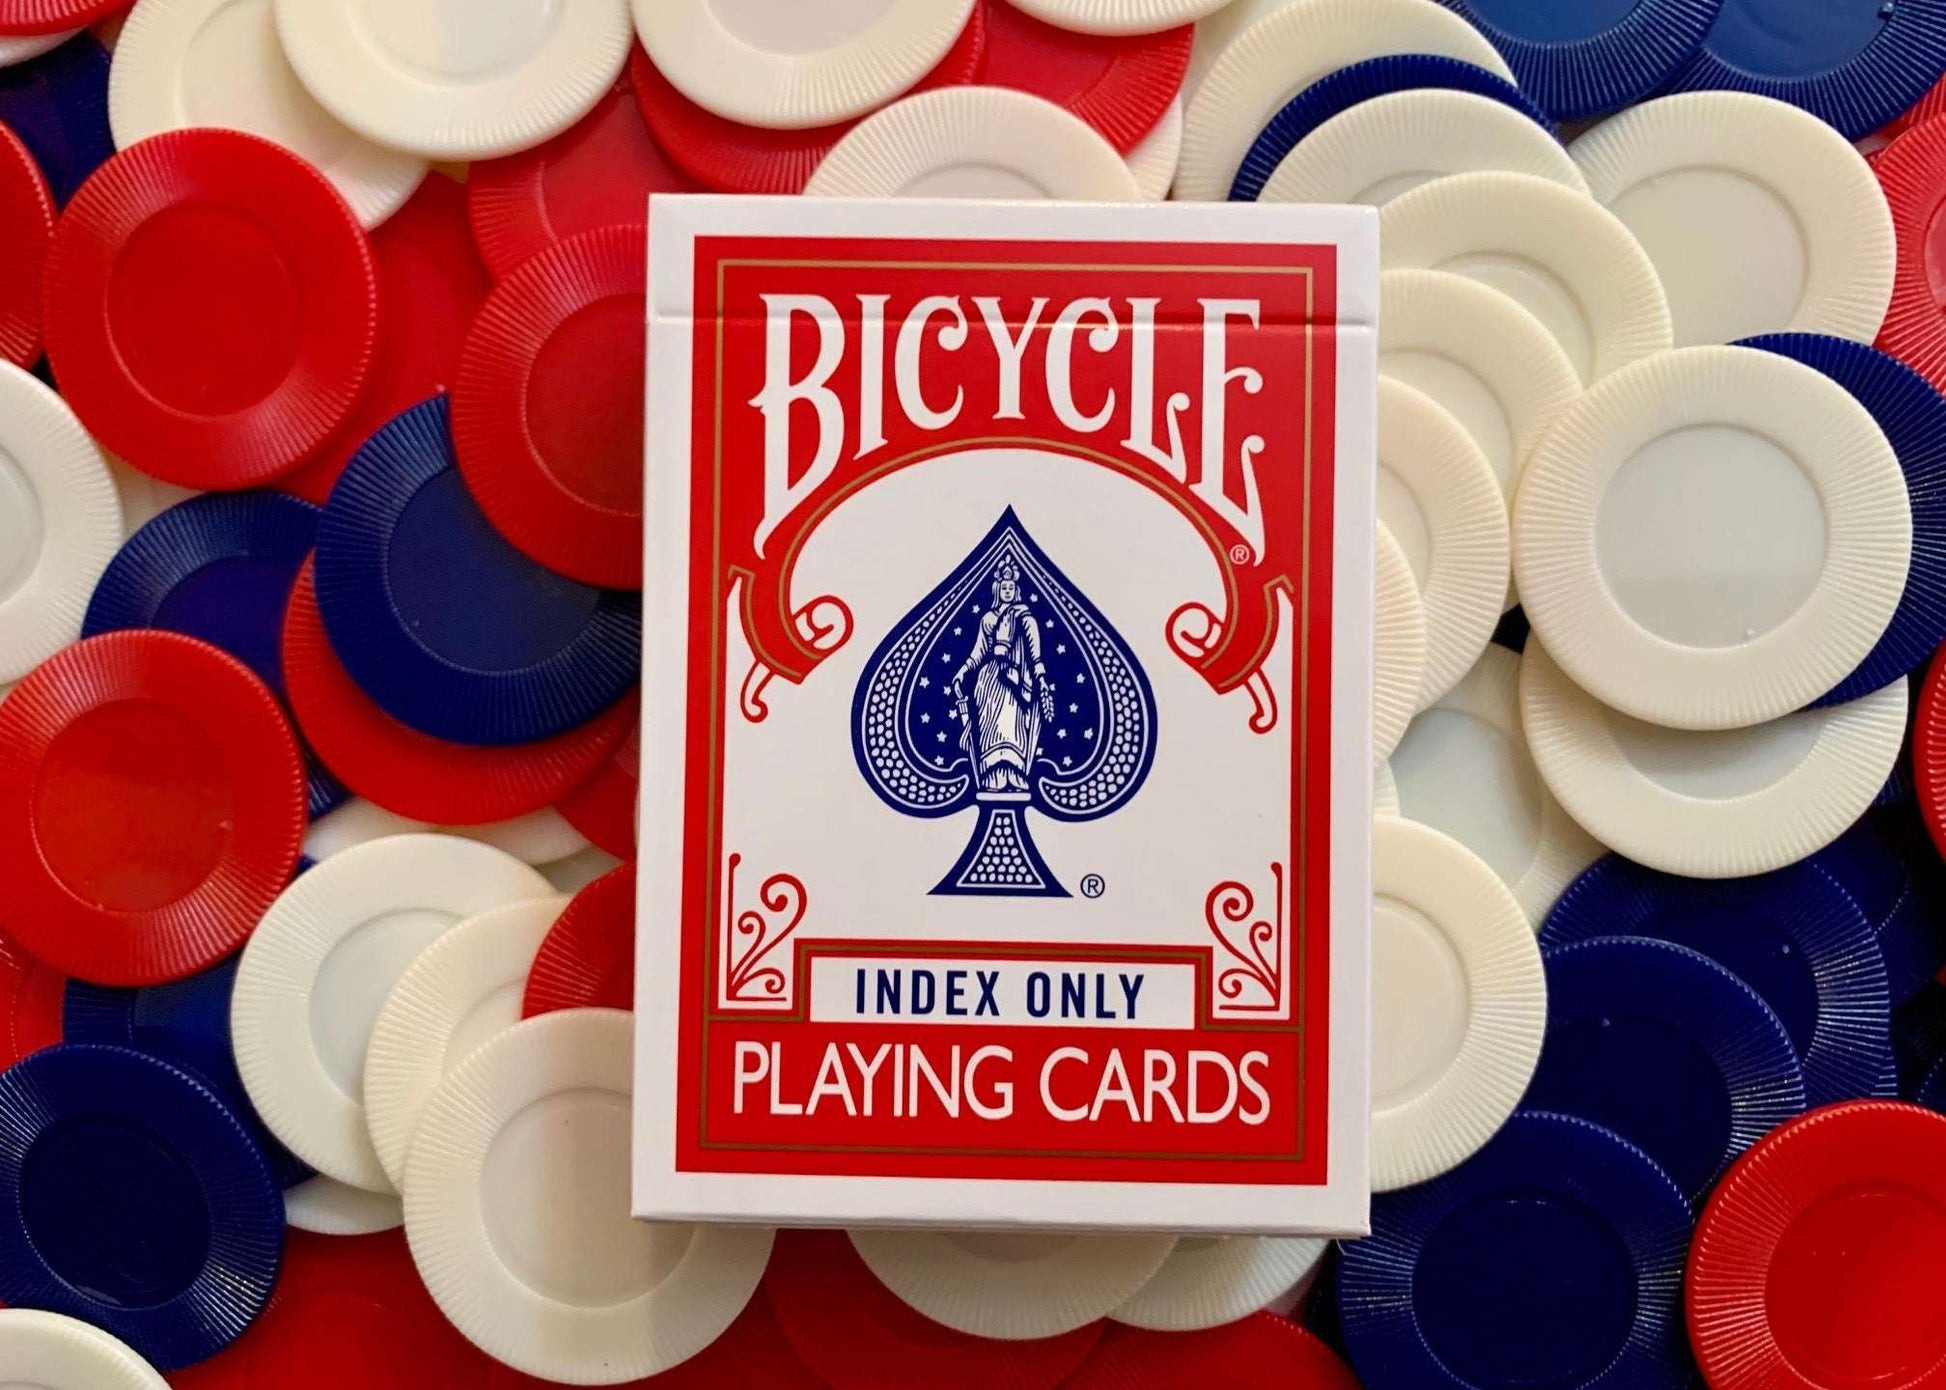 PlayingCardDecks.com-Index Only Stripper Bicycle Playing Cards